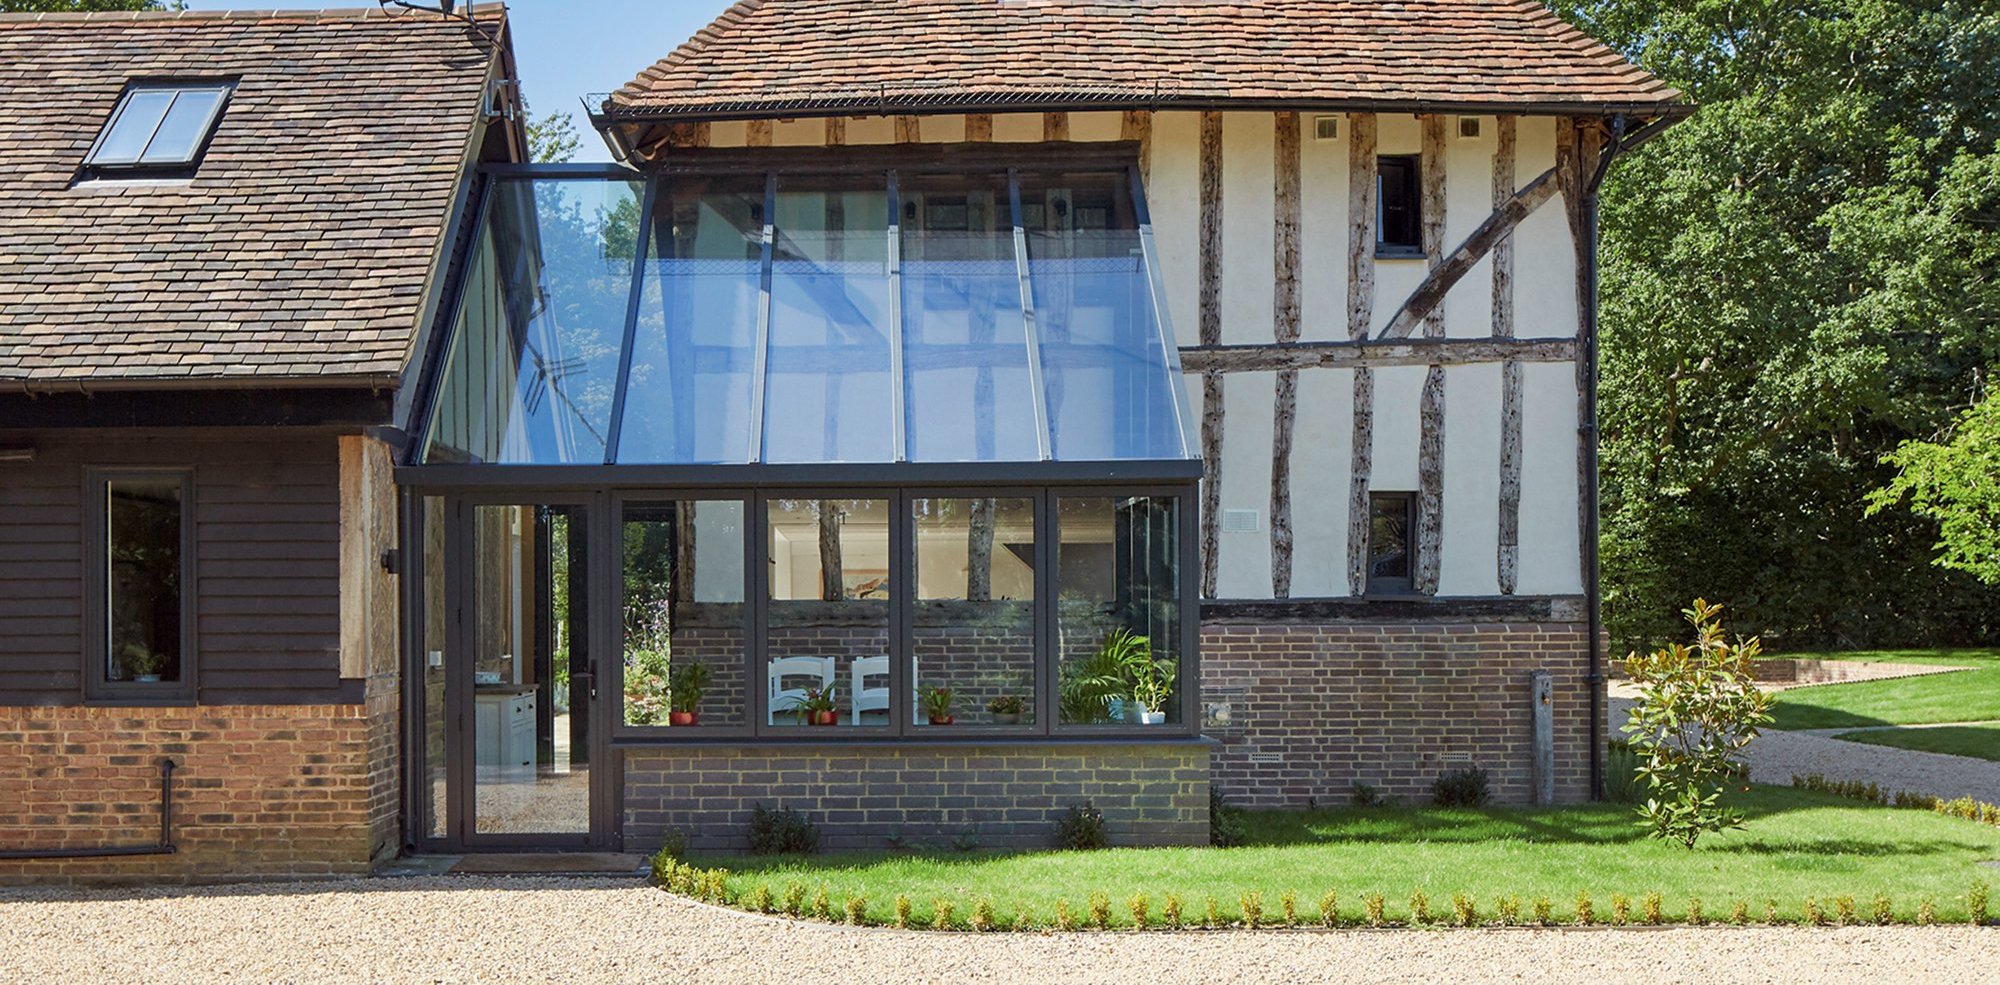 Modern extension to a listed building by Apropos